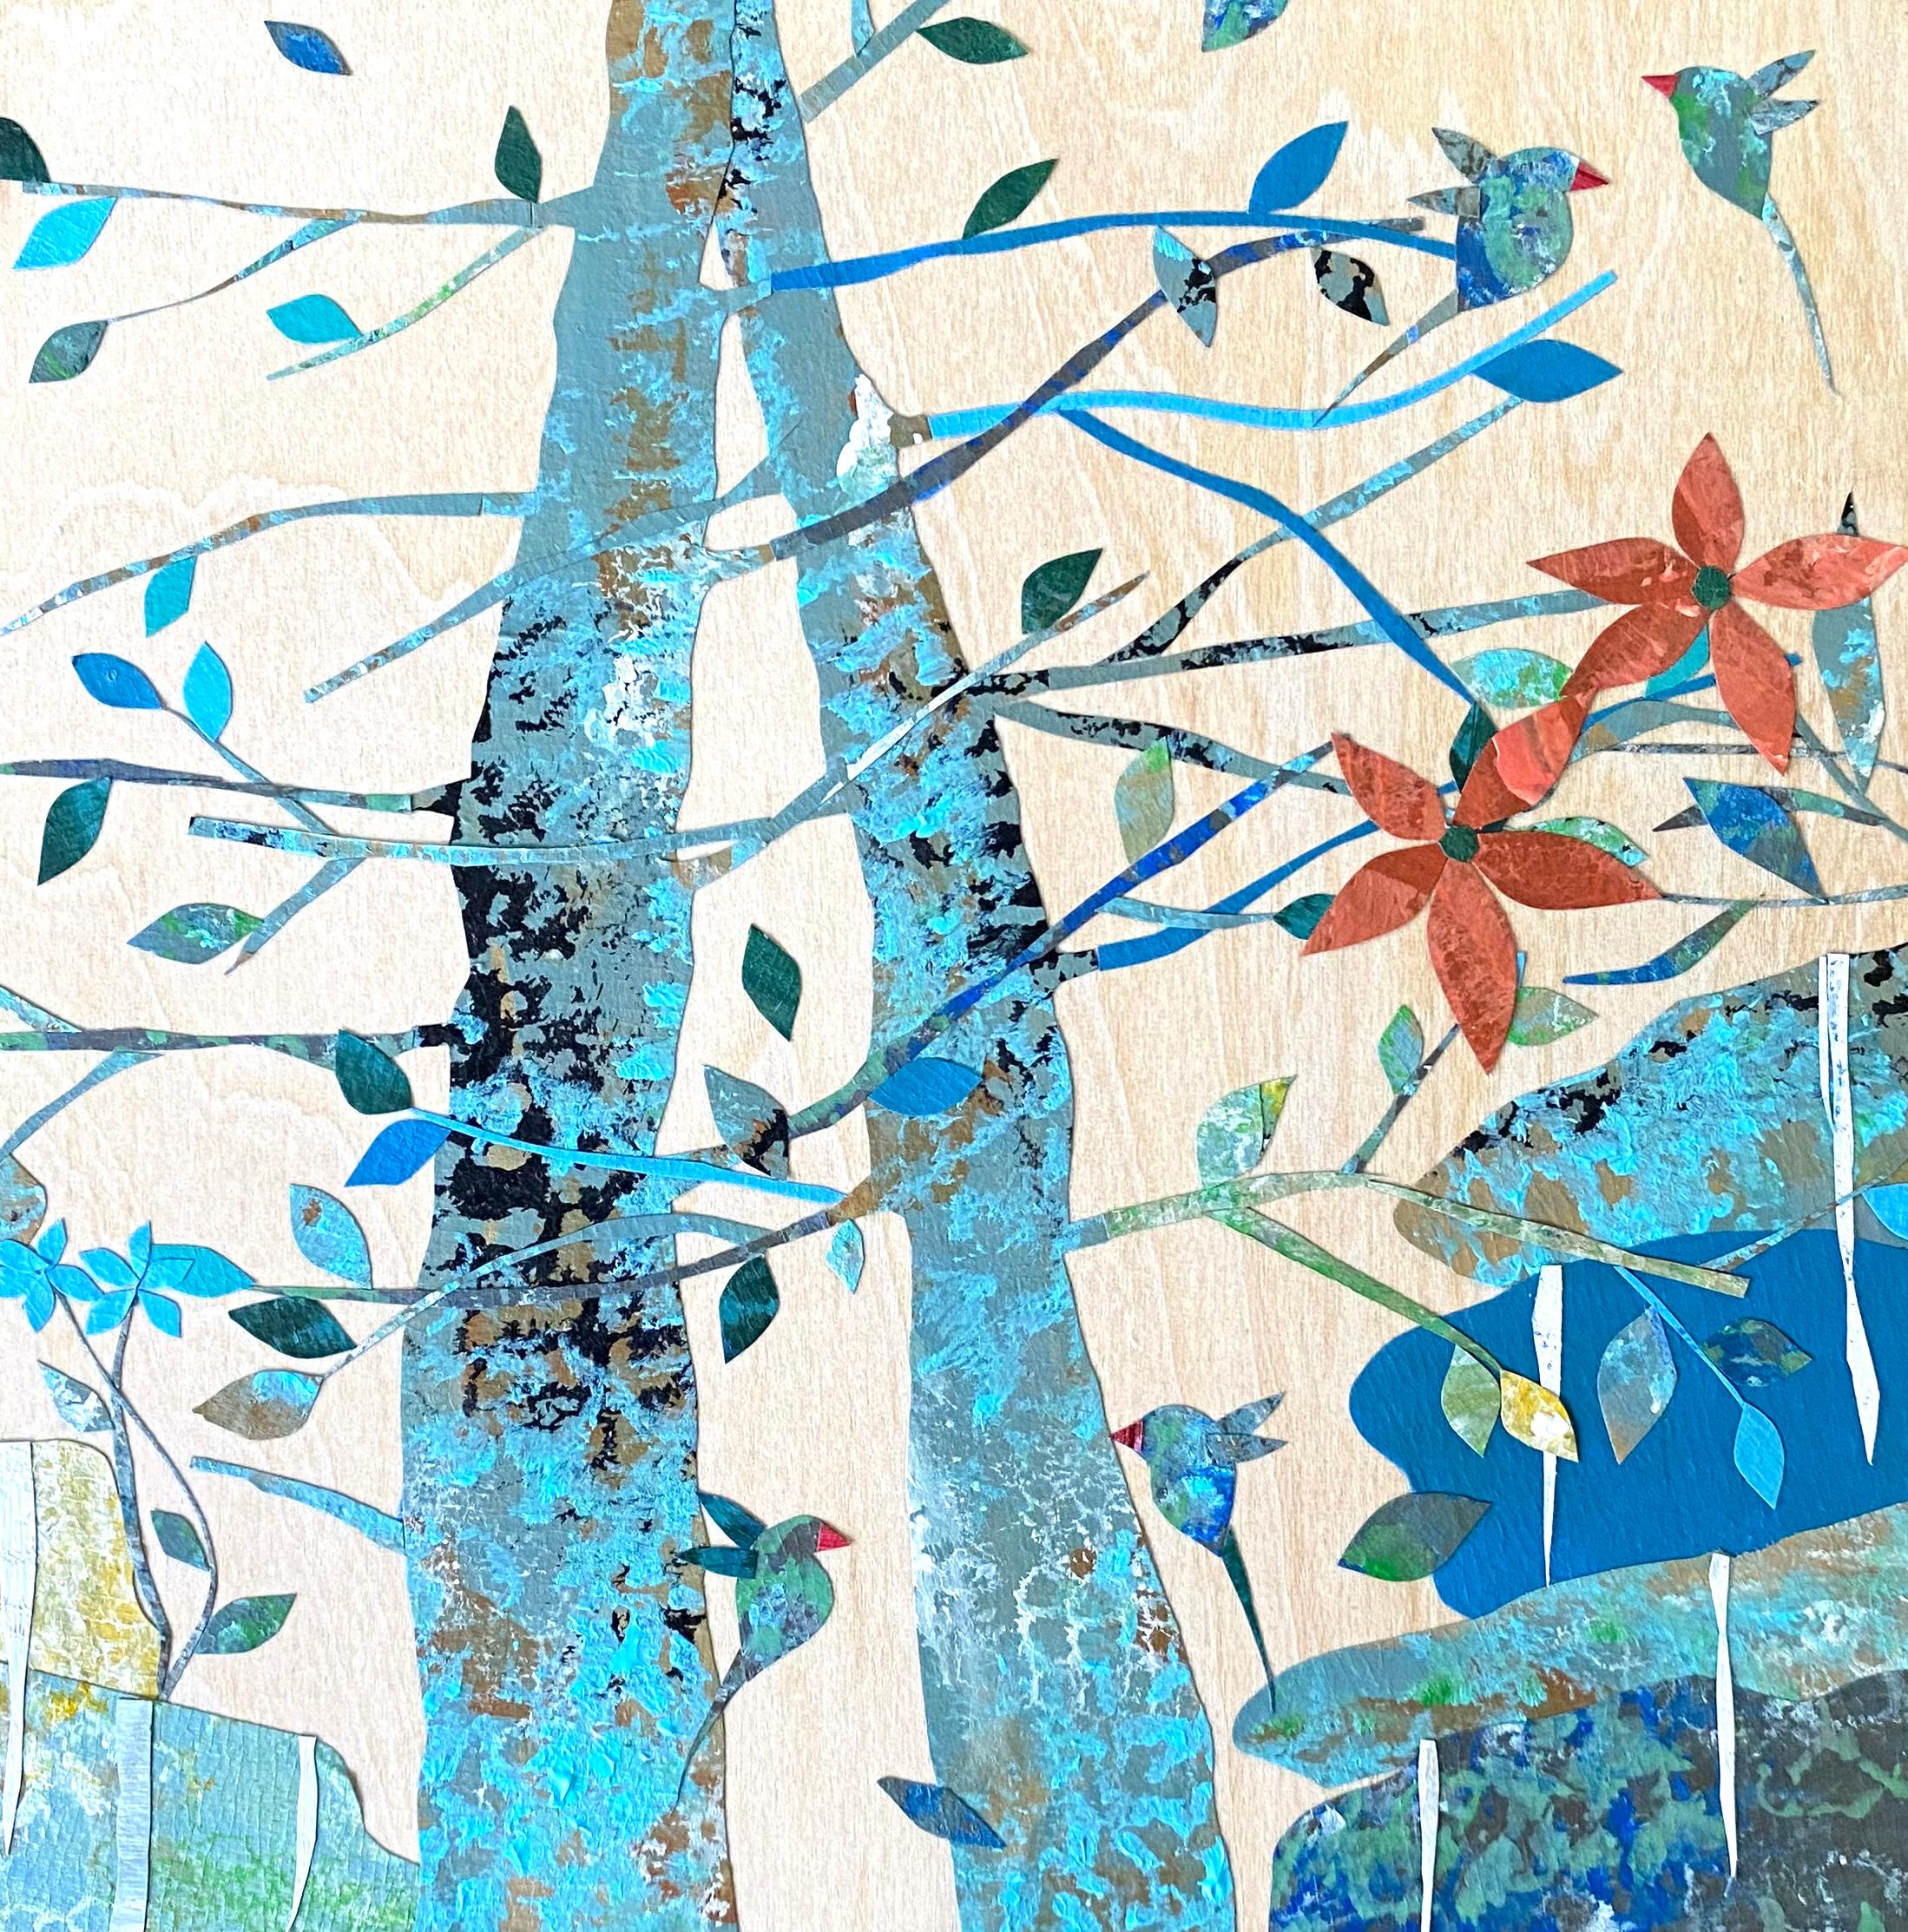 Aster da Fonseca Figurative Painting - Lilies II (Collage, Landscape, Trees, Leaves, Flowers, Blue, Teal, Red, Birds)